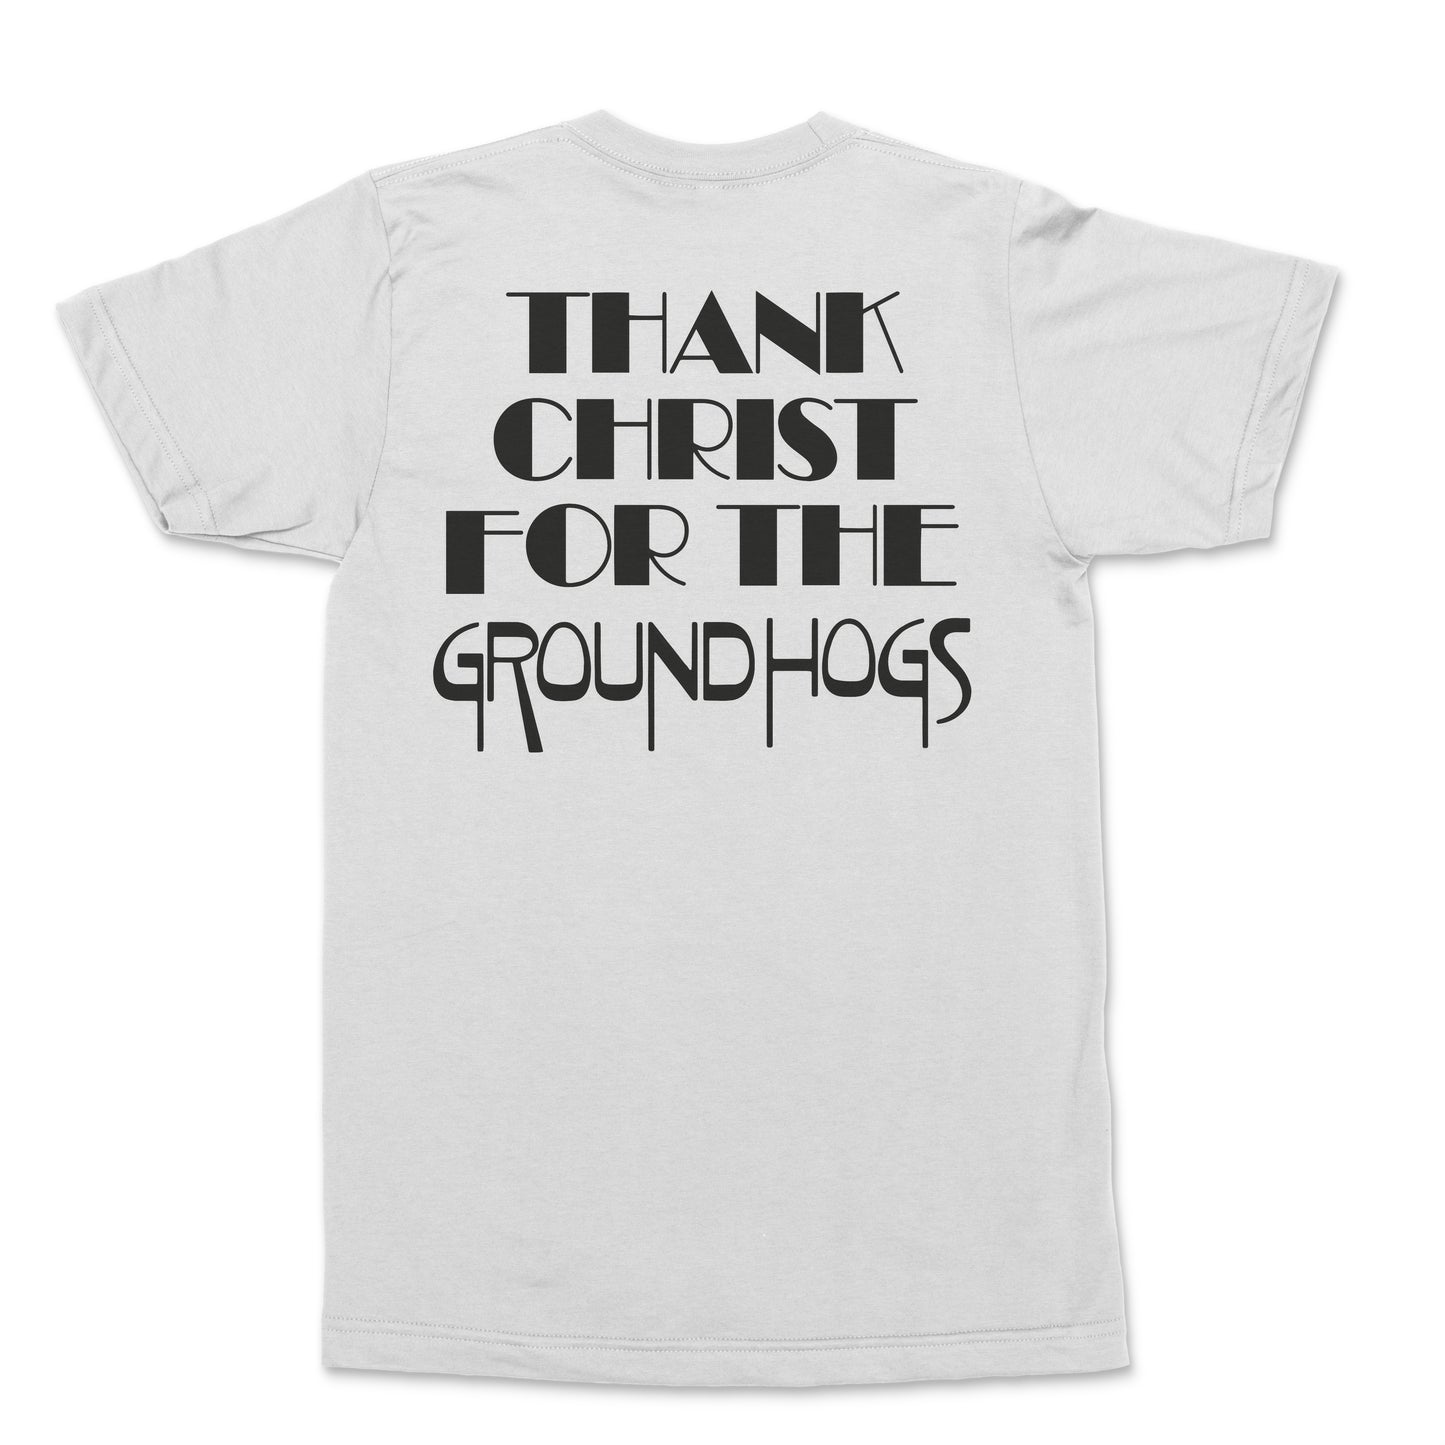 Groundhogs - Thank Christ For The Groundhogs in White